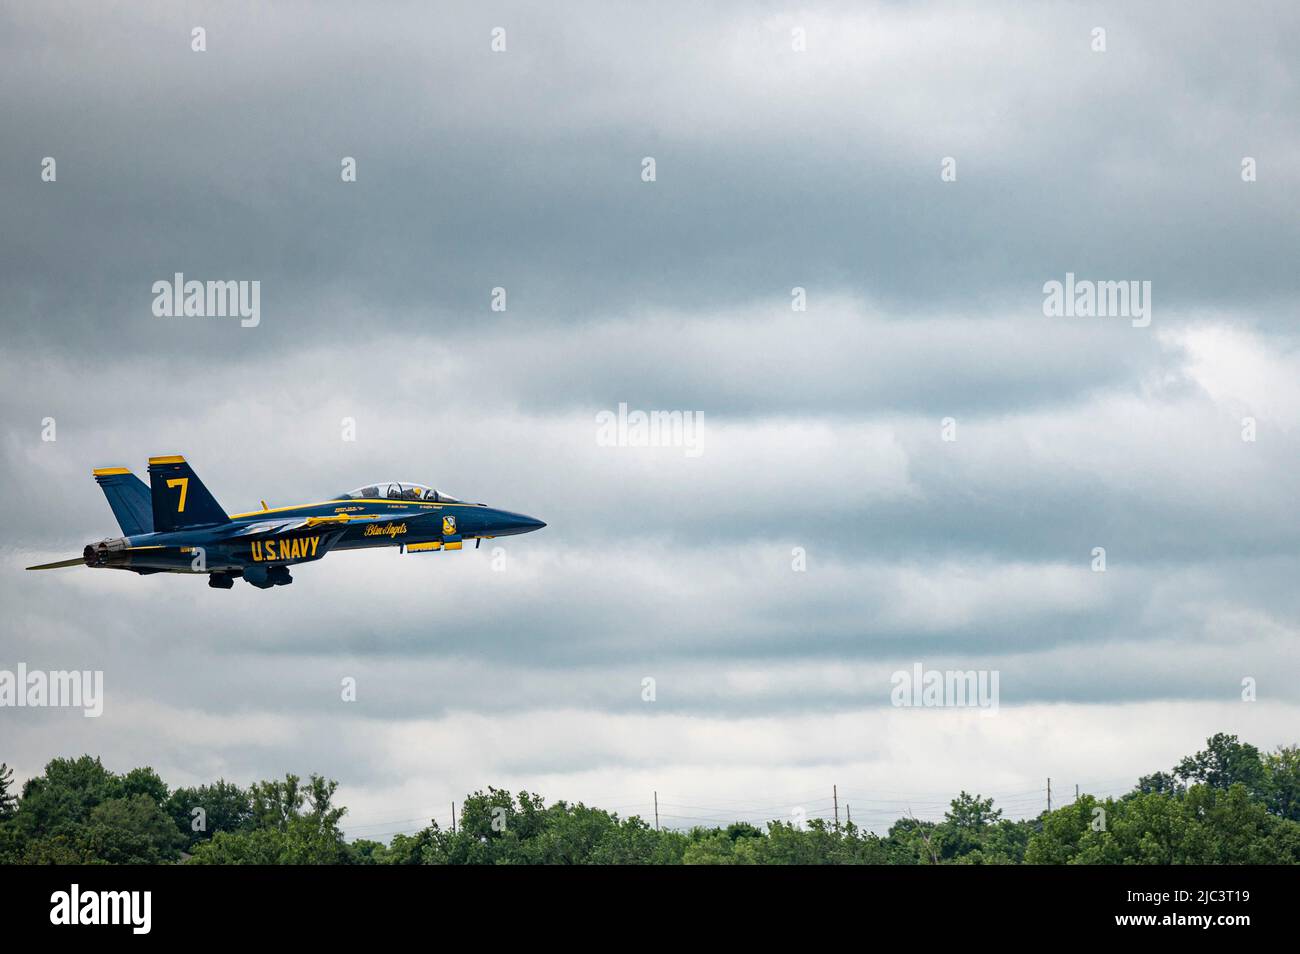 CHESTERFIELD, Mo. (June 8, 2022) Lt. Griffin Stangel, the #7 pilot and narrator of the U.S. Navy flight demonstration team, the Blue Angels, conducts a key influencer flight with Daniel O’Keefe, June 8, 2022. O’Keefe, a Greater St. Louis Area Scouts leader, was selected for the Blue Angels flight due to his continued community service and positive youth involvement. The Blue Angels are in the St. Louis area for the Spirit of St. Louis Airshow, which takes place June 11-12 and marks the St. Louis-made F/A-18 Super Hornet making its debut and return to the area. (U.S. Navy photo by Mass Communic Stock Photo